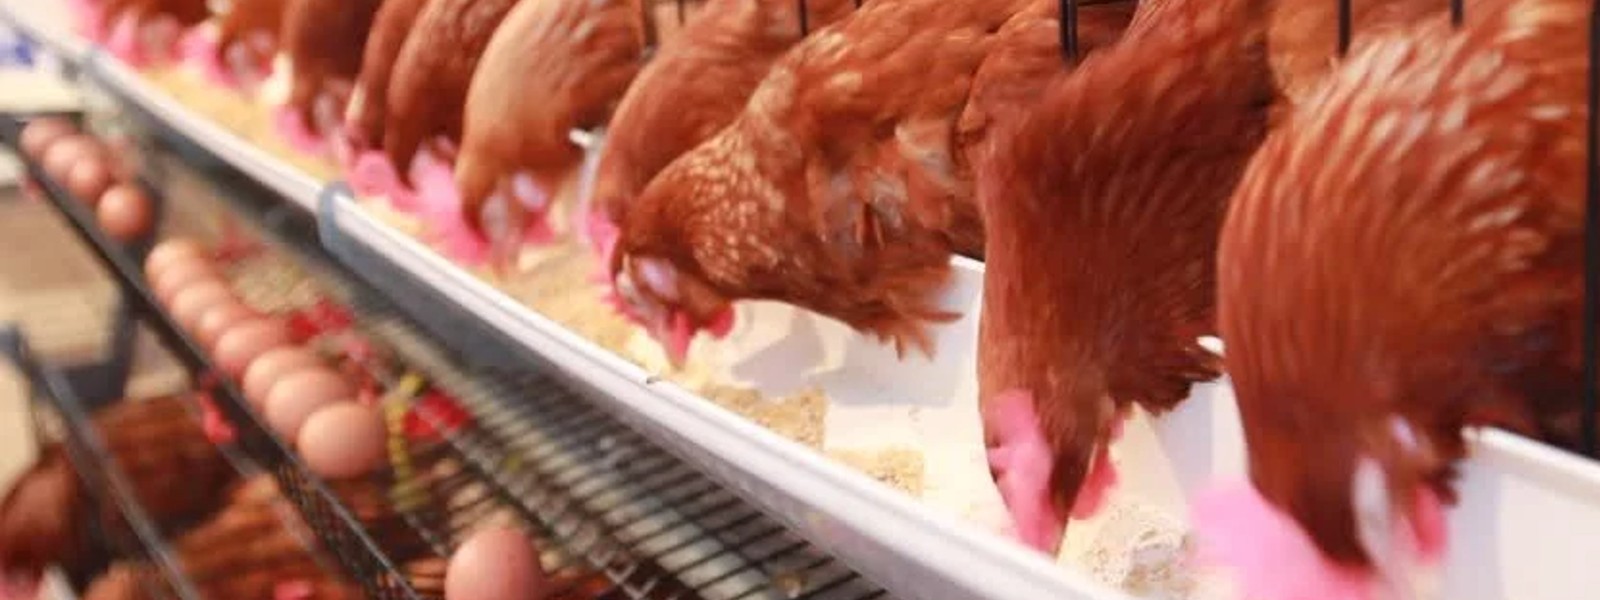 Poultry industry at risk